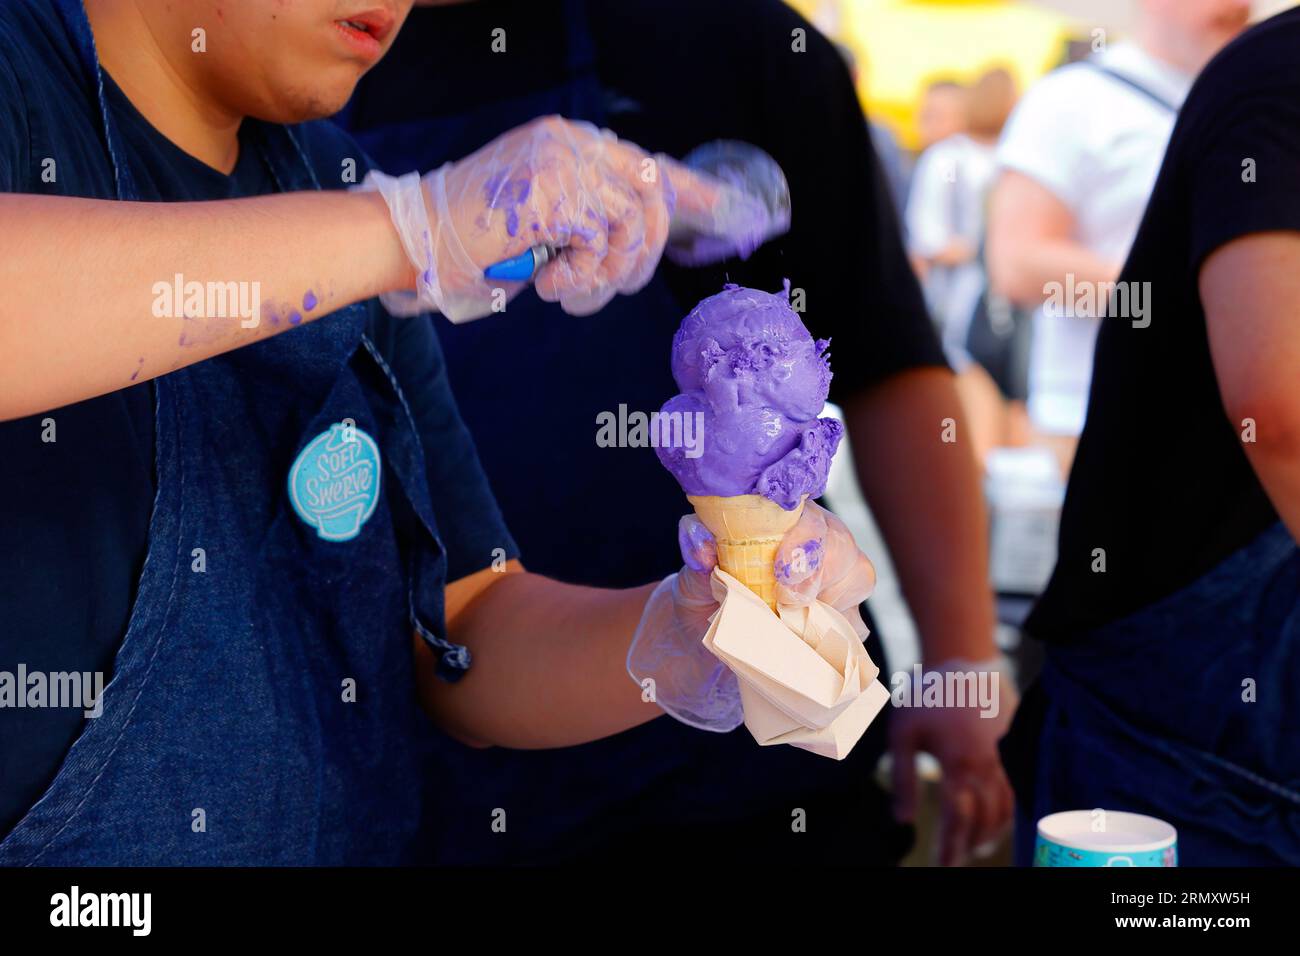 A Soft Swerve worker scoops a double scoop of ube ice cream on a wafer cone at a Philippines Fest food festival street fair in NYC, 27 August 2023. Stock Photo